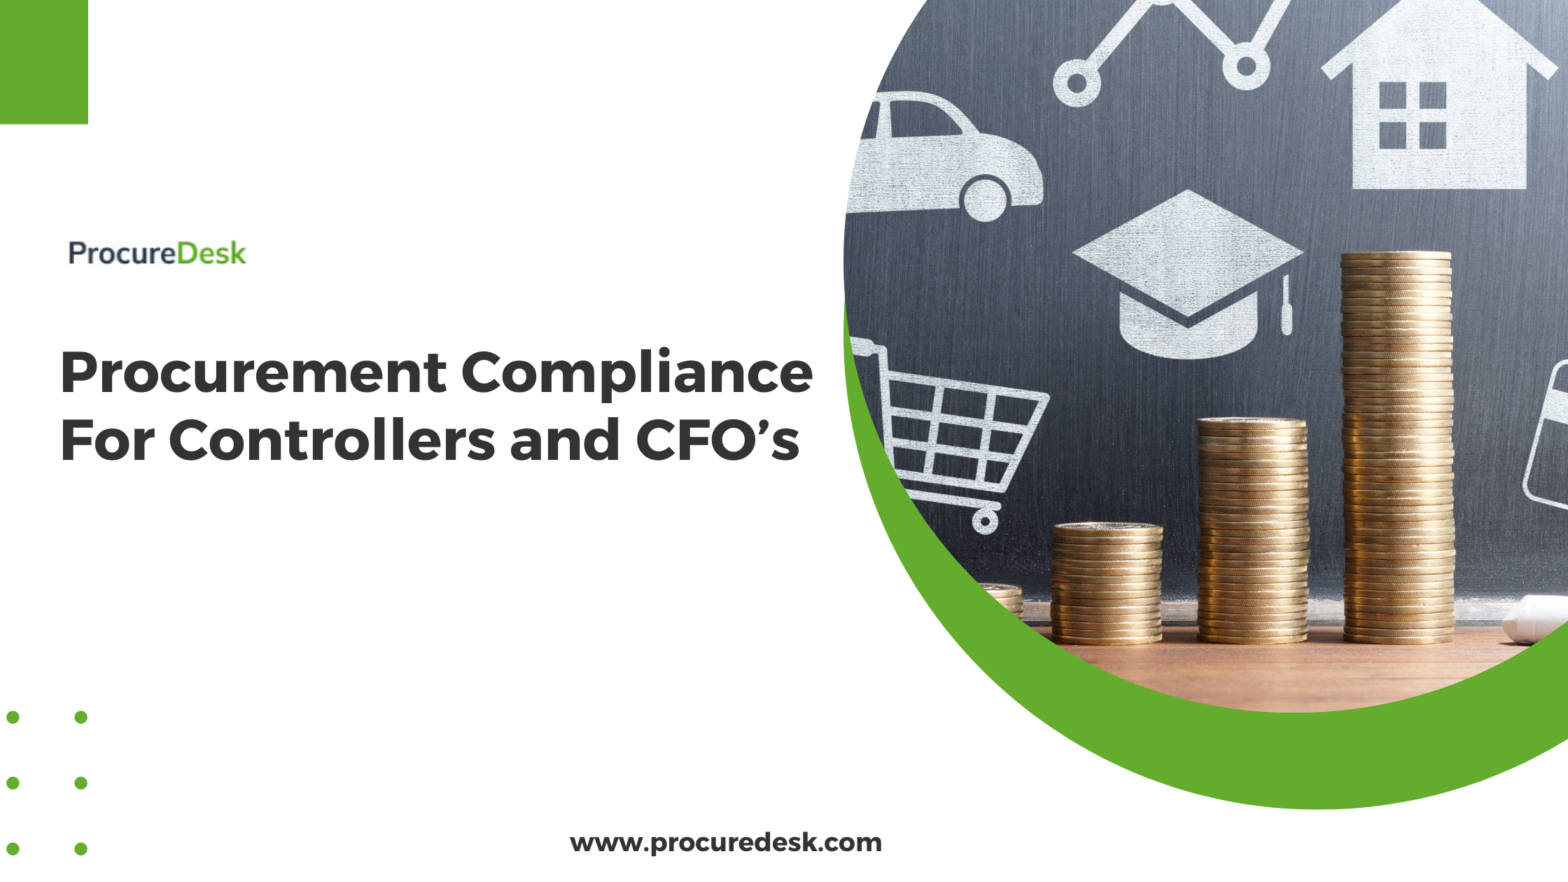 Procurement Compliance For Controllers and CFO’s